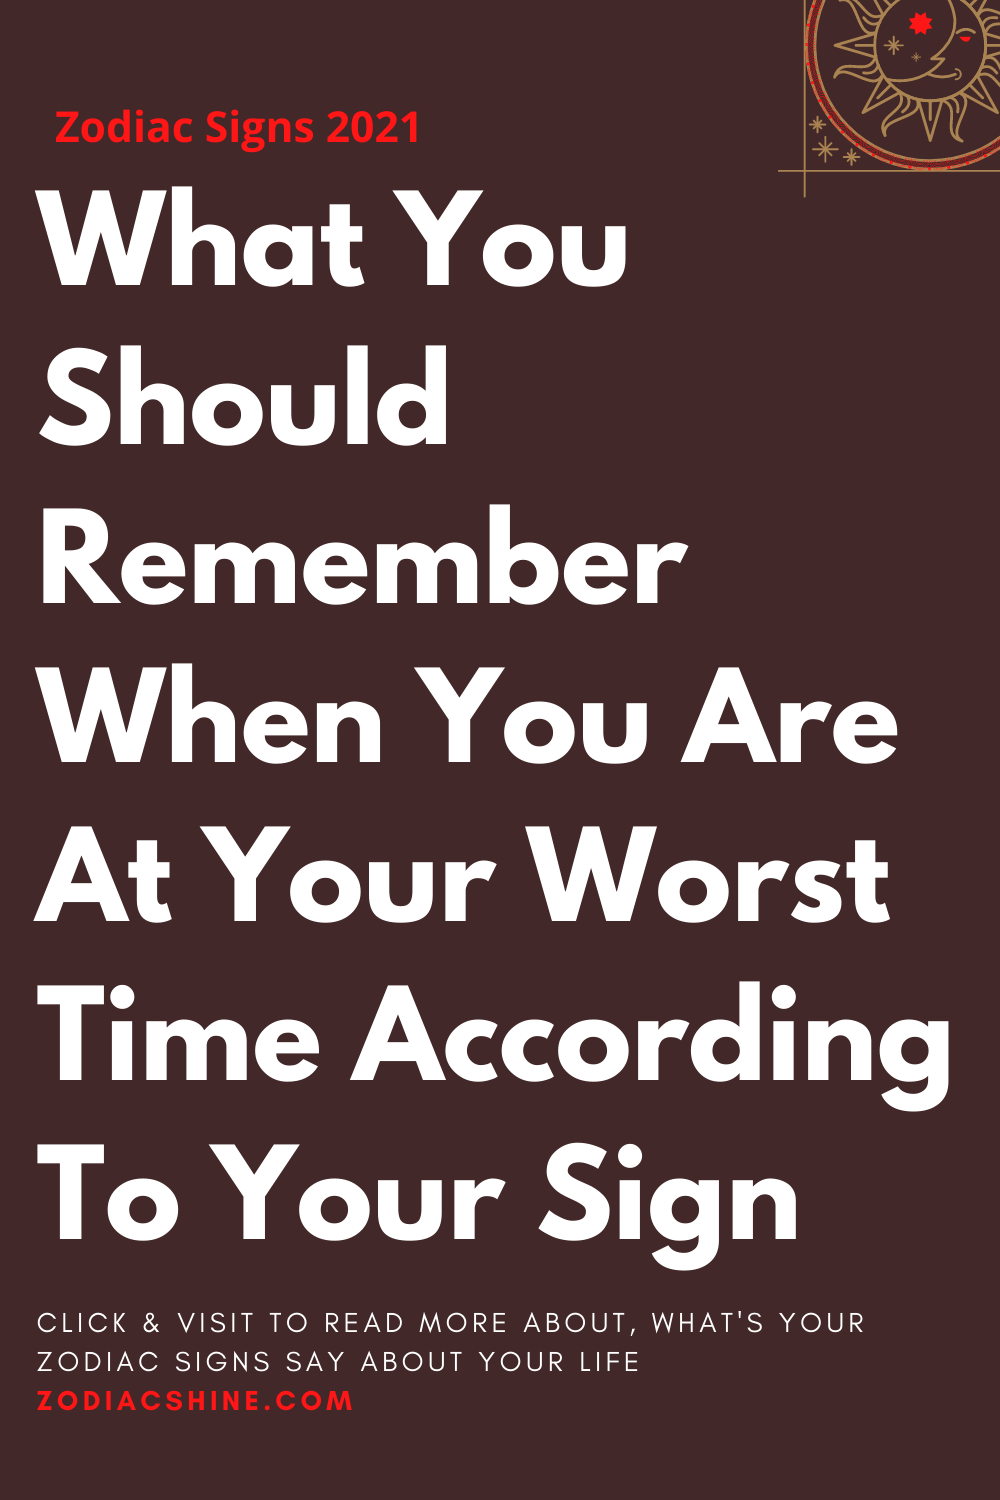 What You Should Remember When You Are At Your Worst Time According To Your Sign